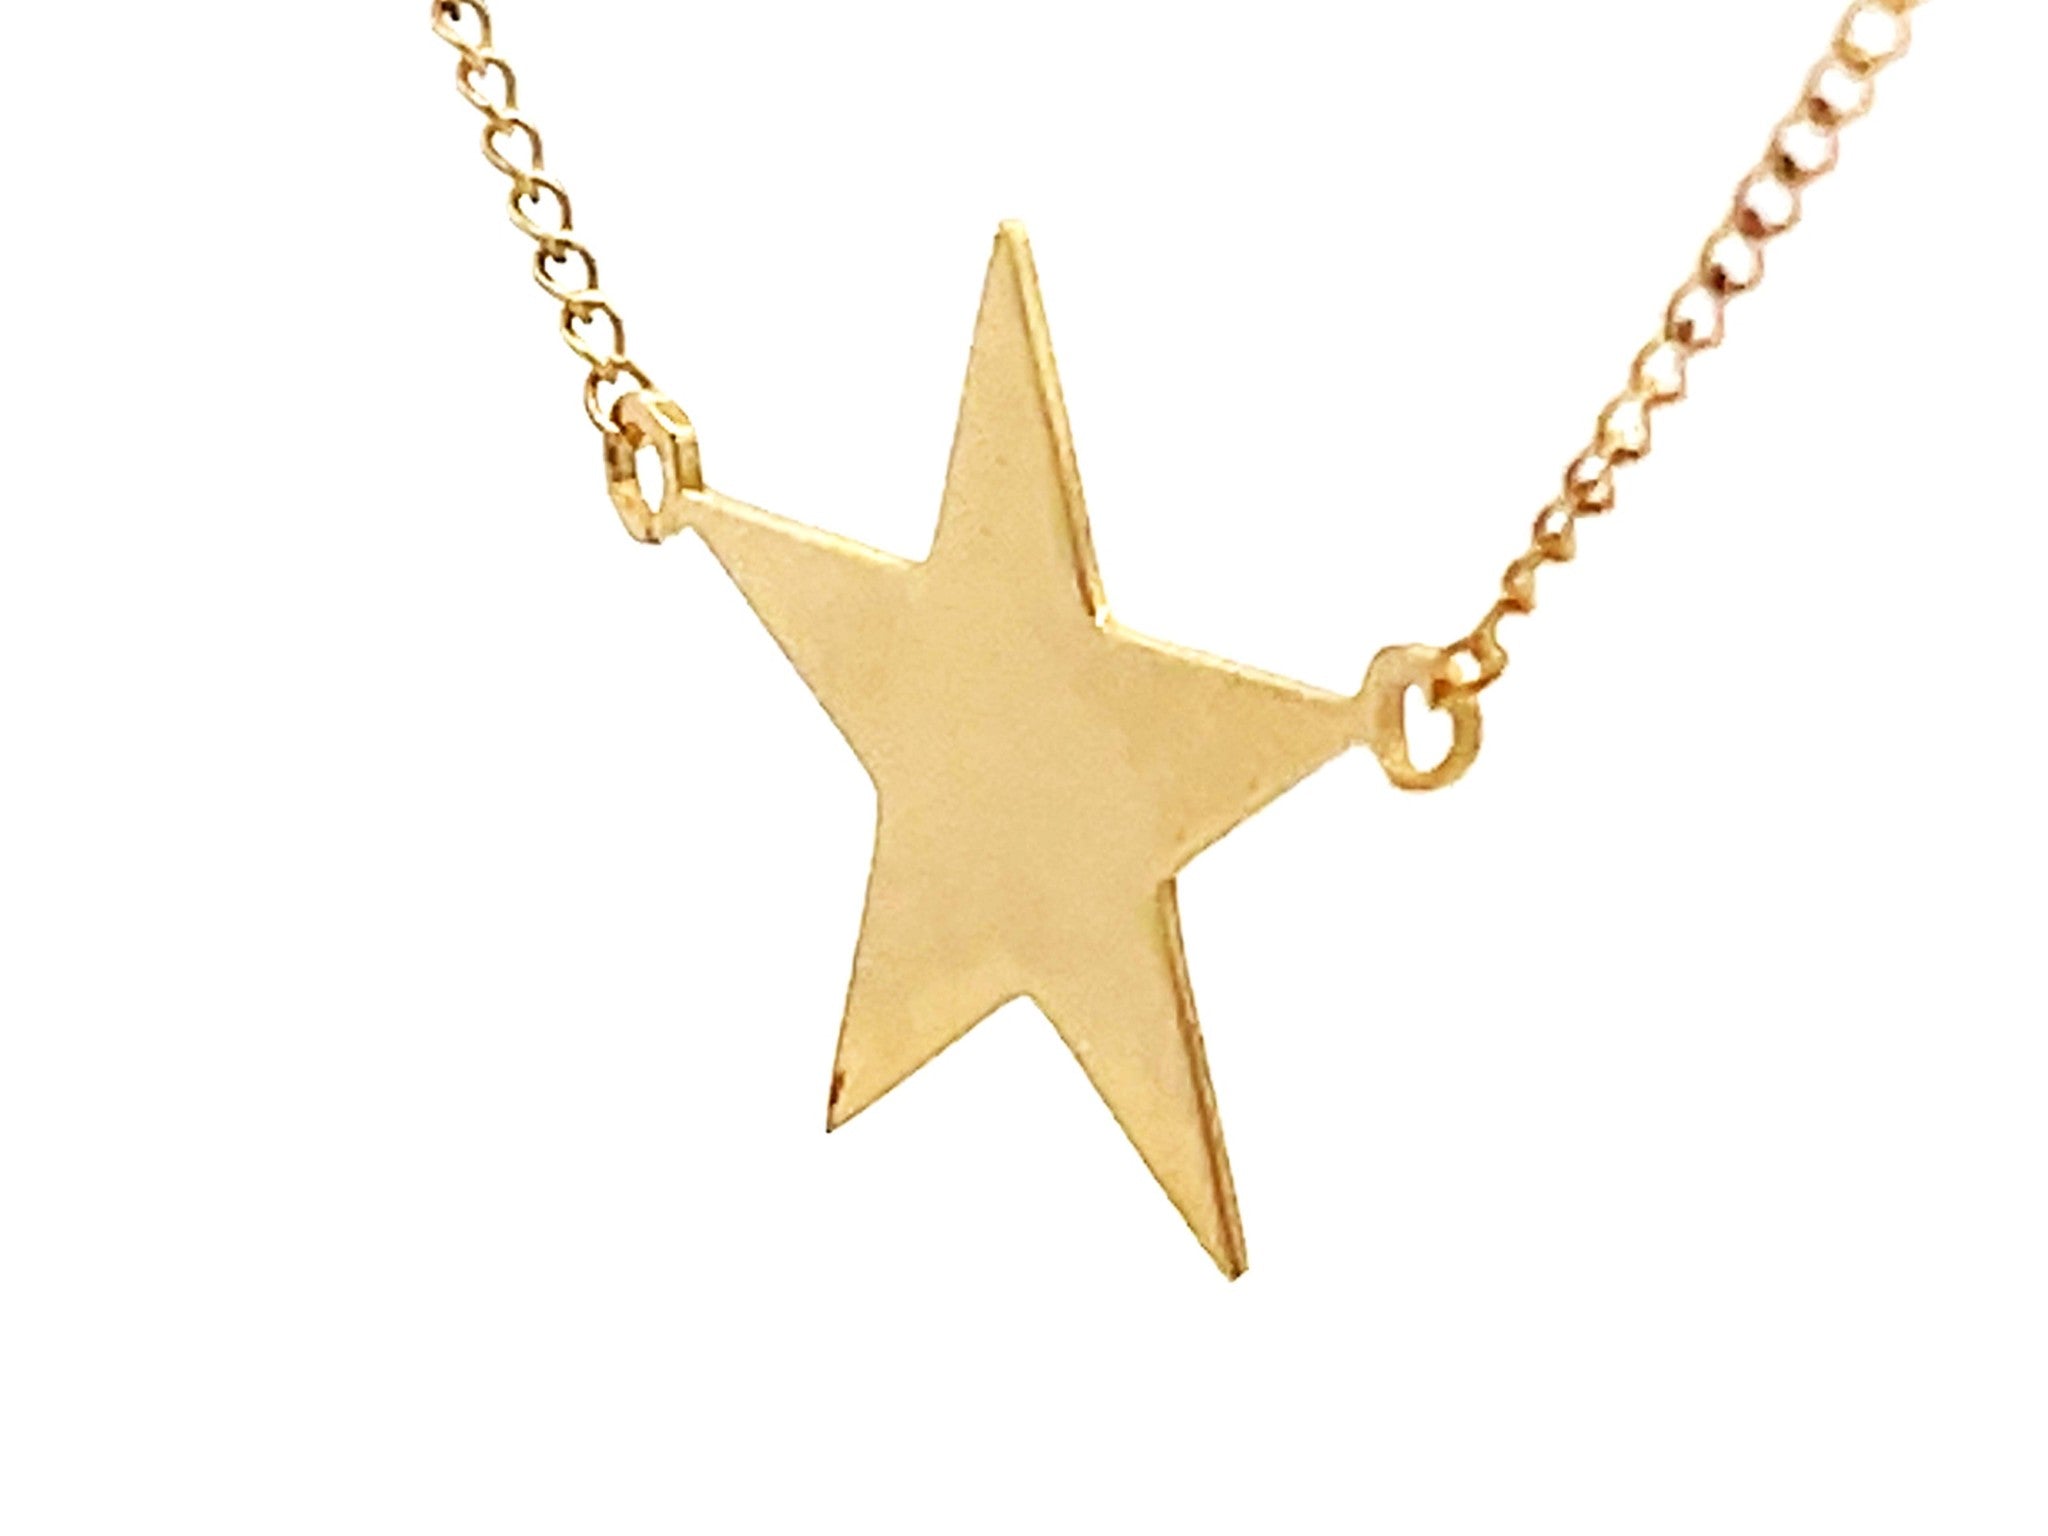 18 mm Star Necklace in 14k Yellow Gold